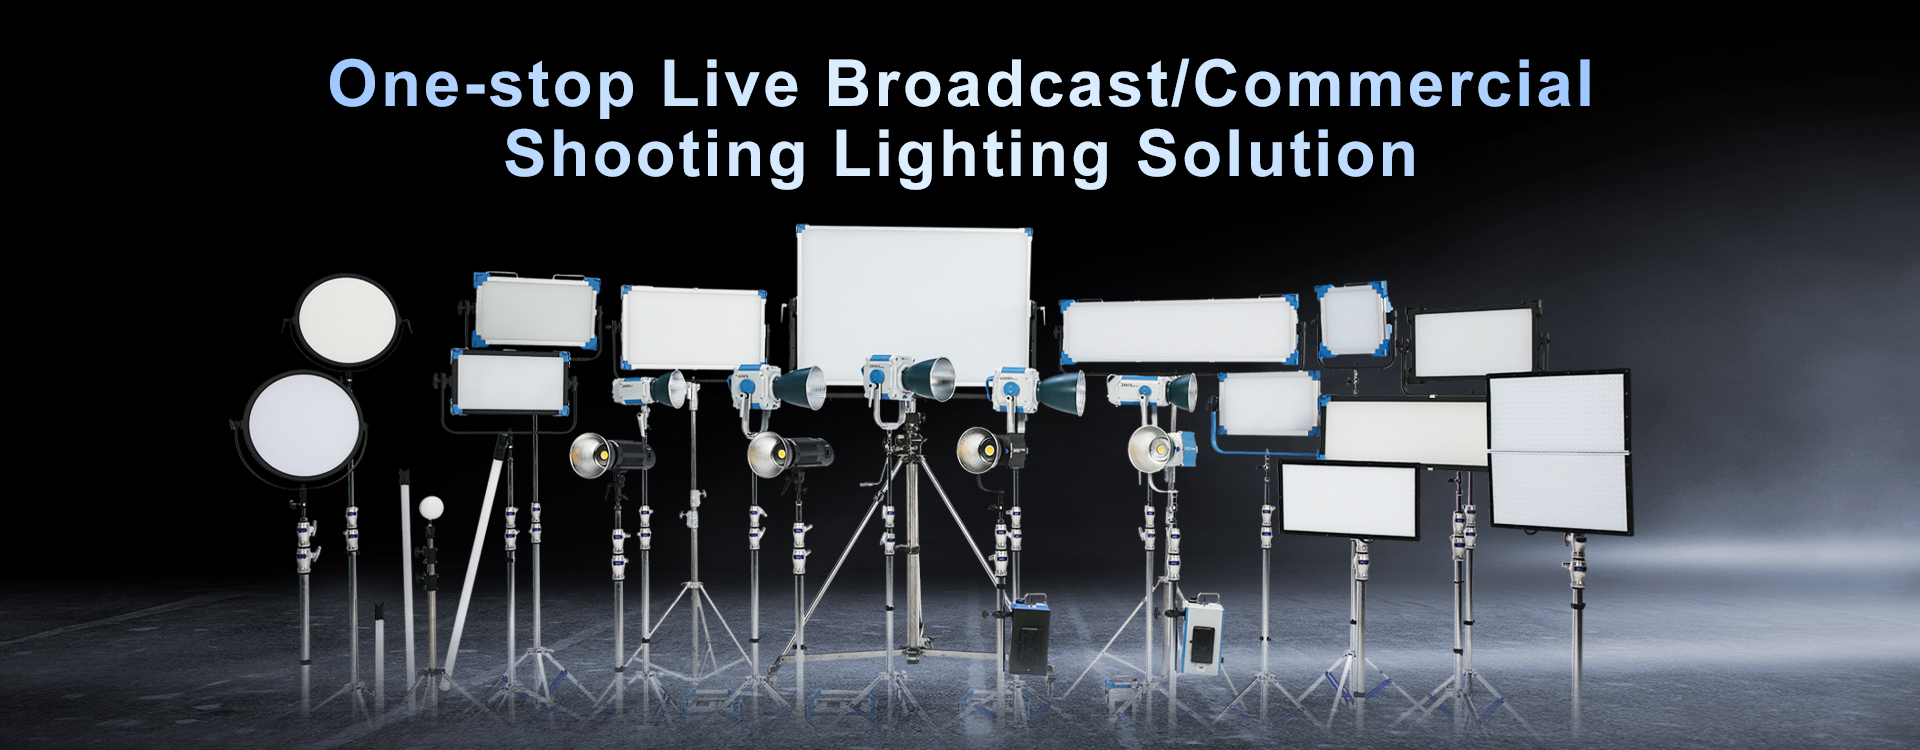 146W APP Controlled COOLCAM 120X (G) Bi-color Streaming Lights, LED video lights,220W APP-Controlled COOLCAM 200D (G) LED Monolight for Photo and video shooting, for Live streaming or live studio,310W max APP and DMX Controlled COOLCAM 300D (G) Daylight 5600K LED monolight for live photography and video shooting Overview,310W max APP and DMX Controlled Bi-color Coolcam 300X (G) Professional monolight style fill light high brightness for live strea,450W max COOLCAM 400X(G) Bi-Color LED Studio light for photo and video